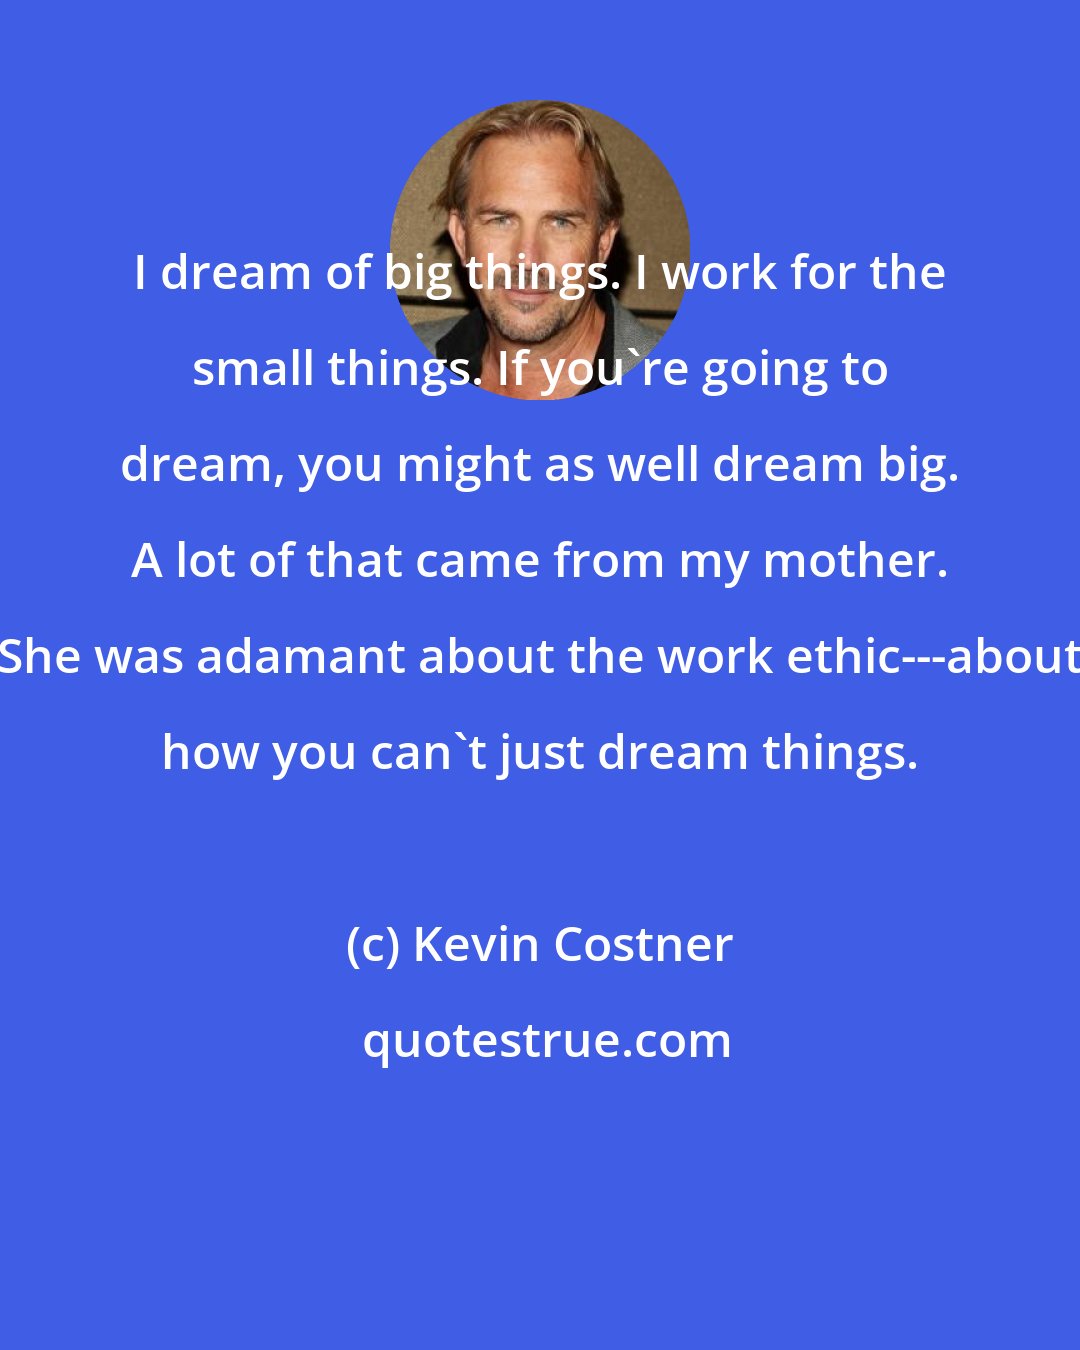 Kevin Costner: I dream of big things. I work for the small things. If you're going to dream, you might as well dream big. A lot of that came from my mother. She was adamant about the work ethic---about how you can't just dream things.